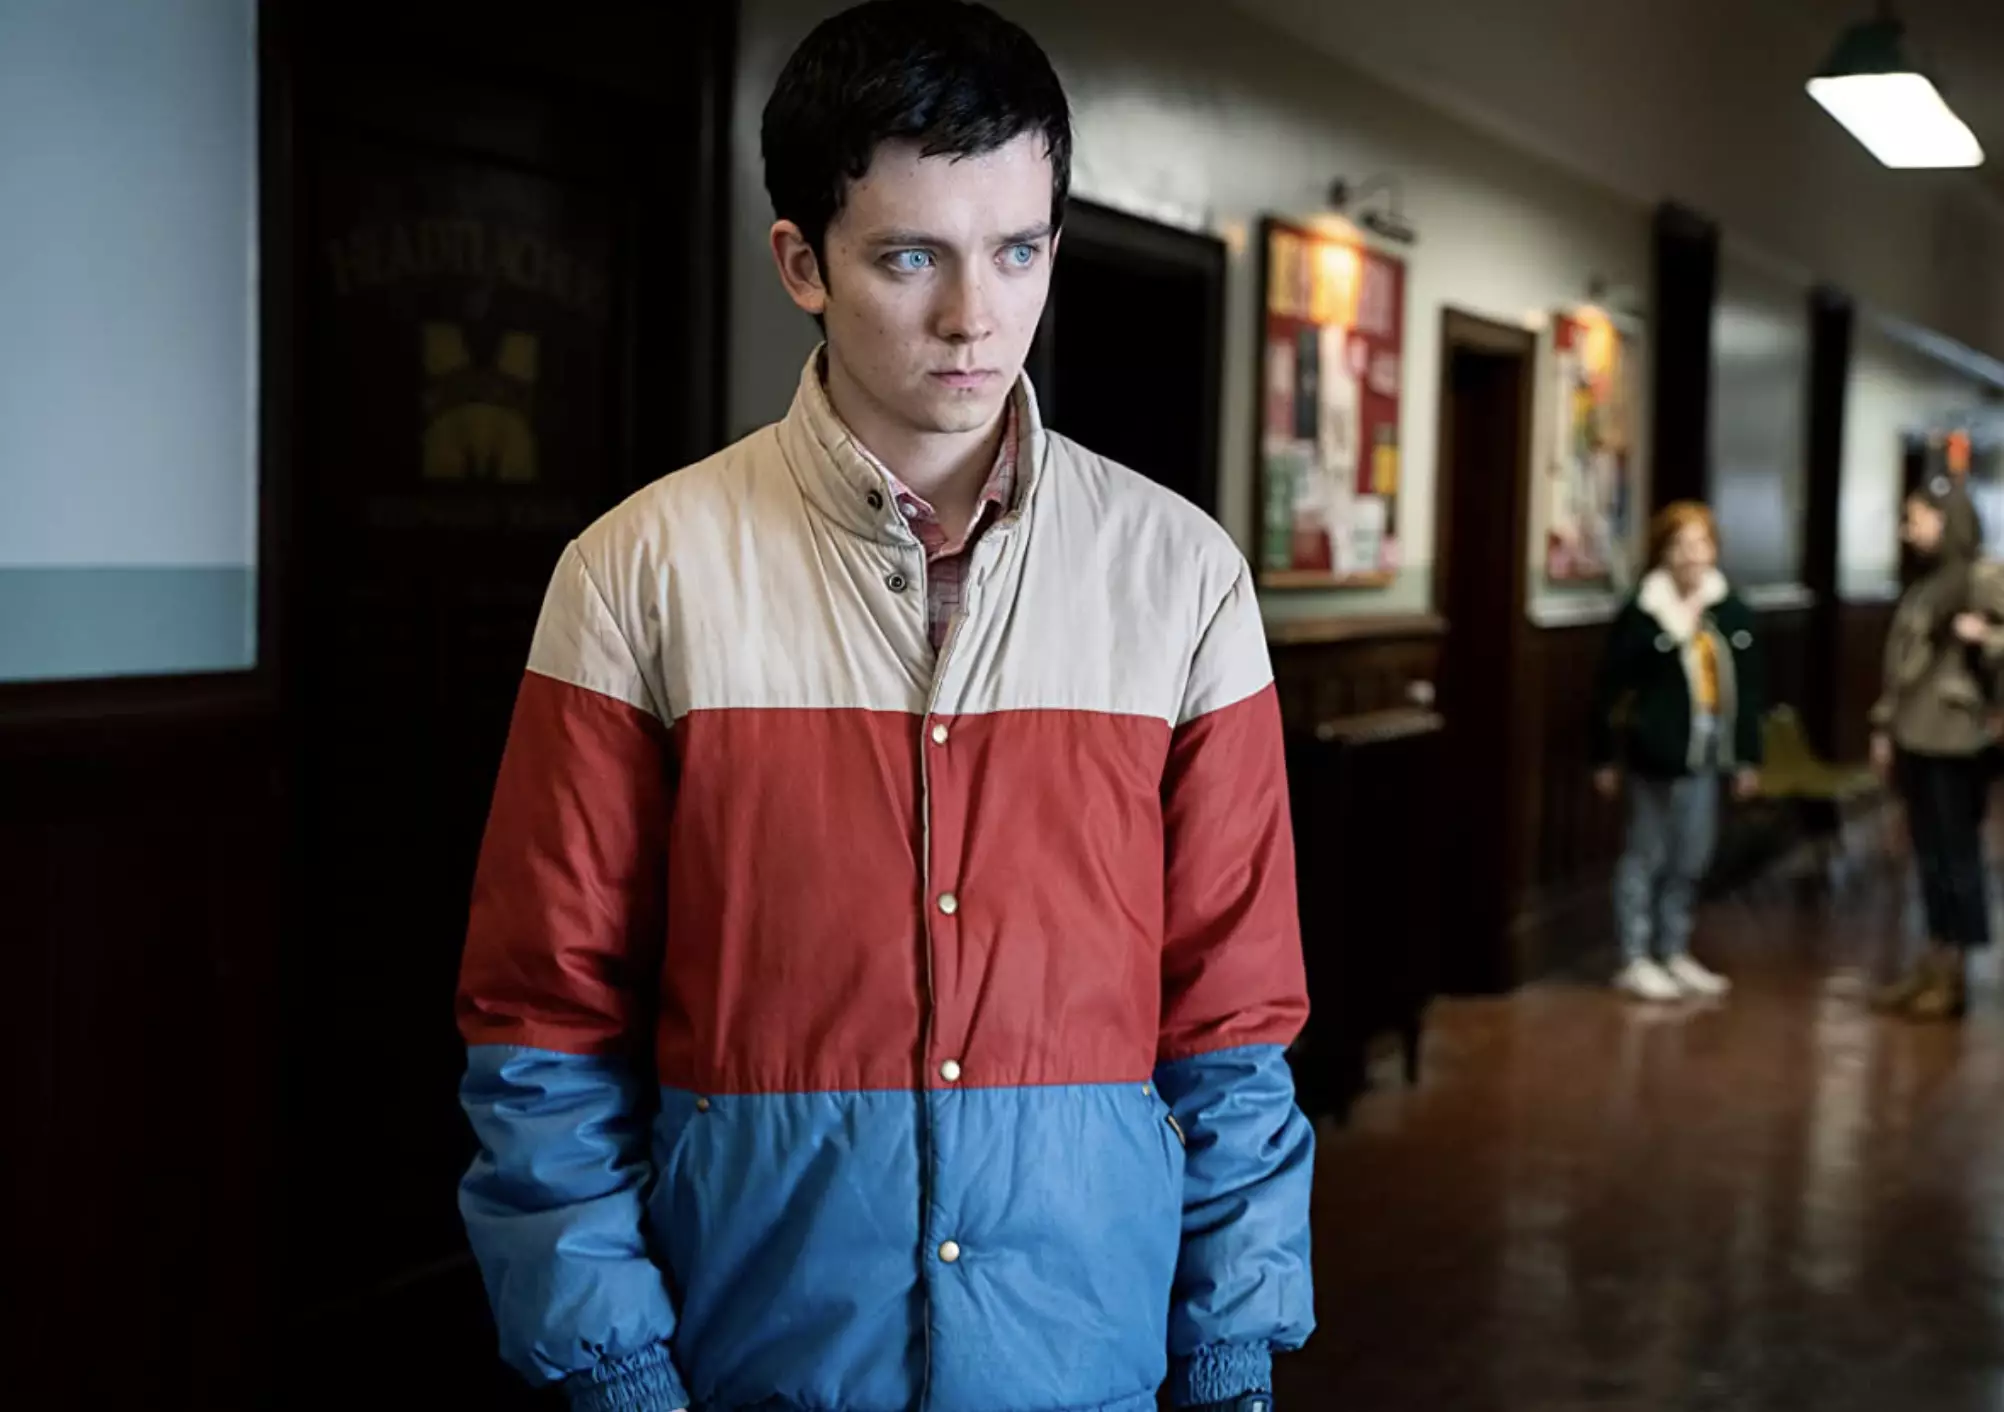 Asa Butterfield in his leading role as Otis.